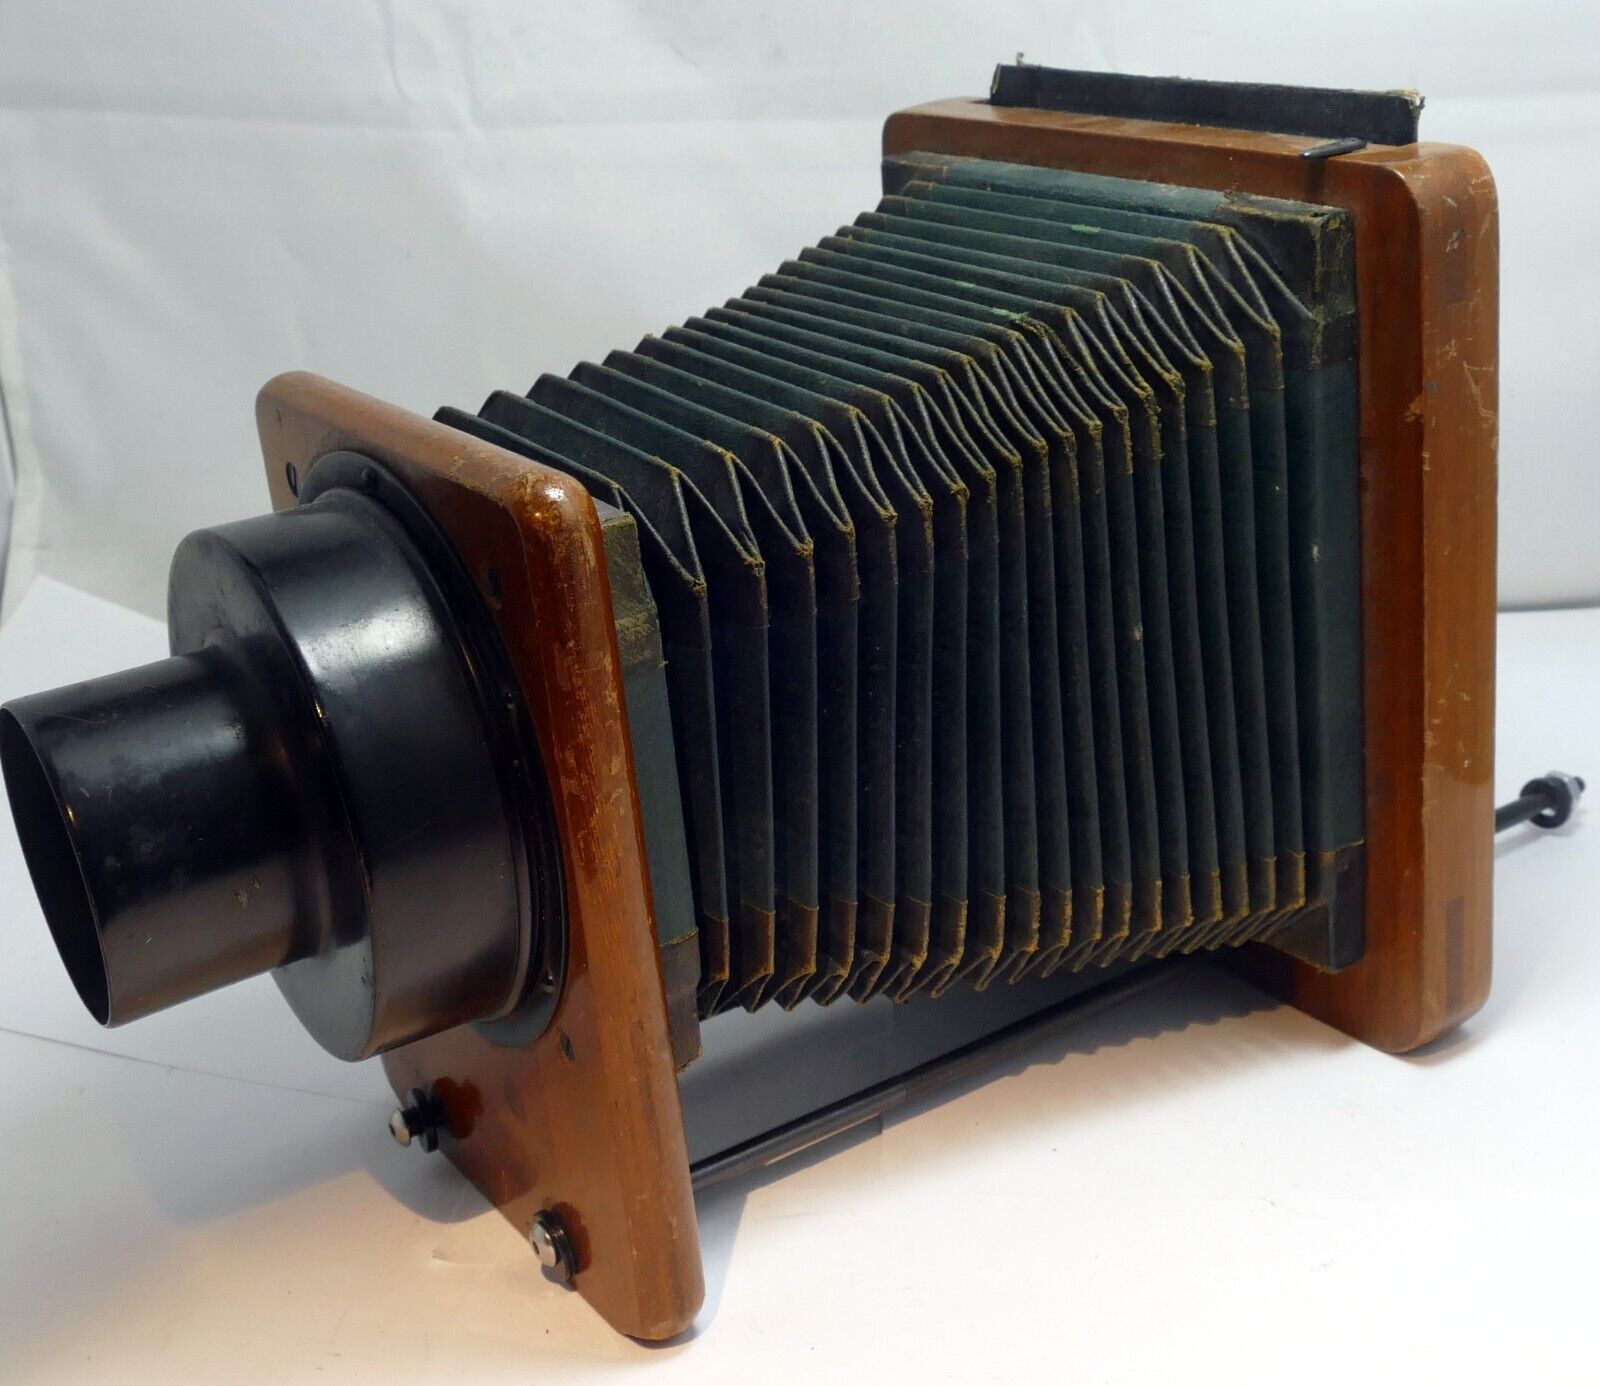 Carl Zeiss Jena Bellows 4X5 View Camera (missing lens)